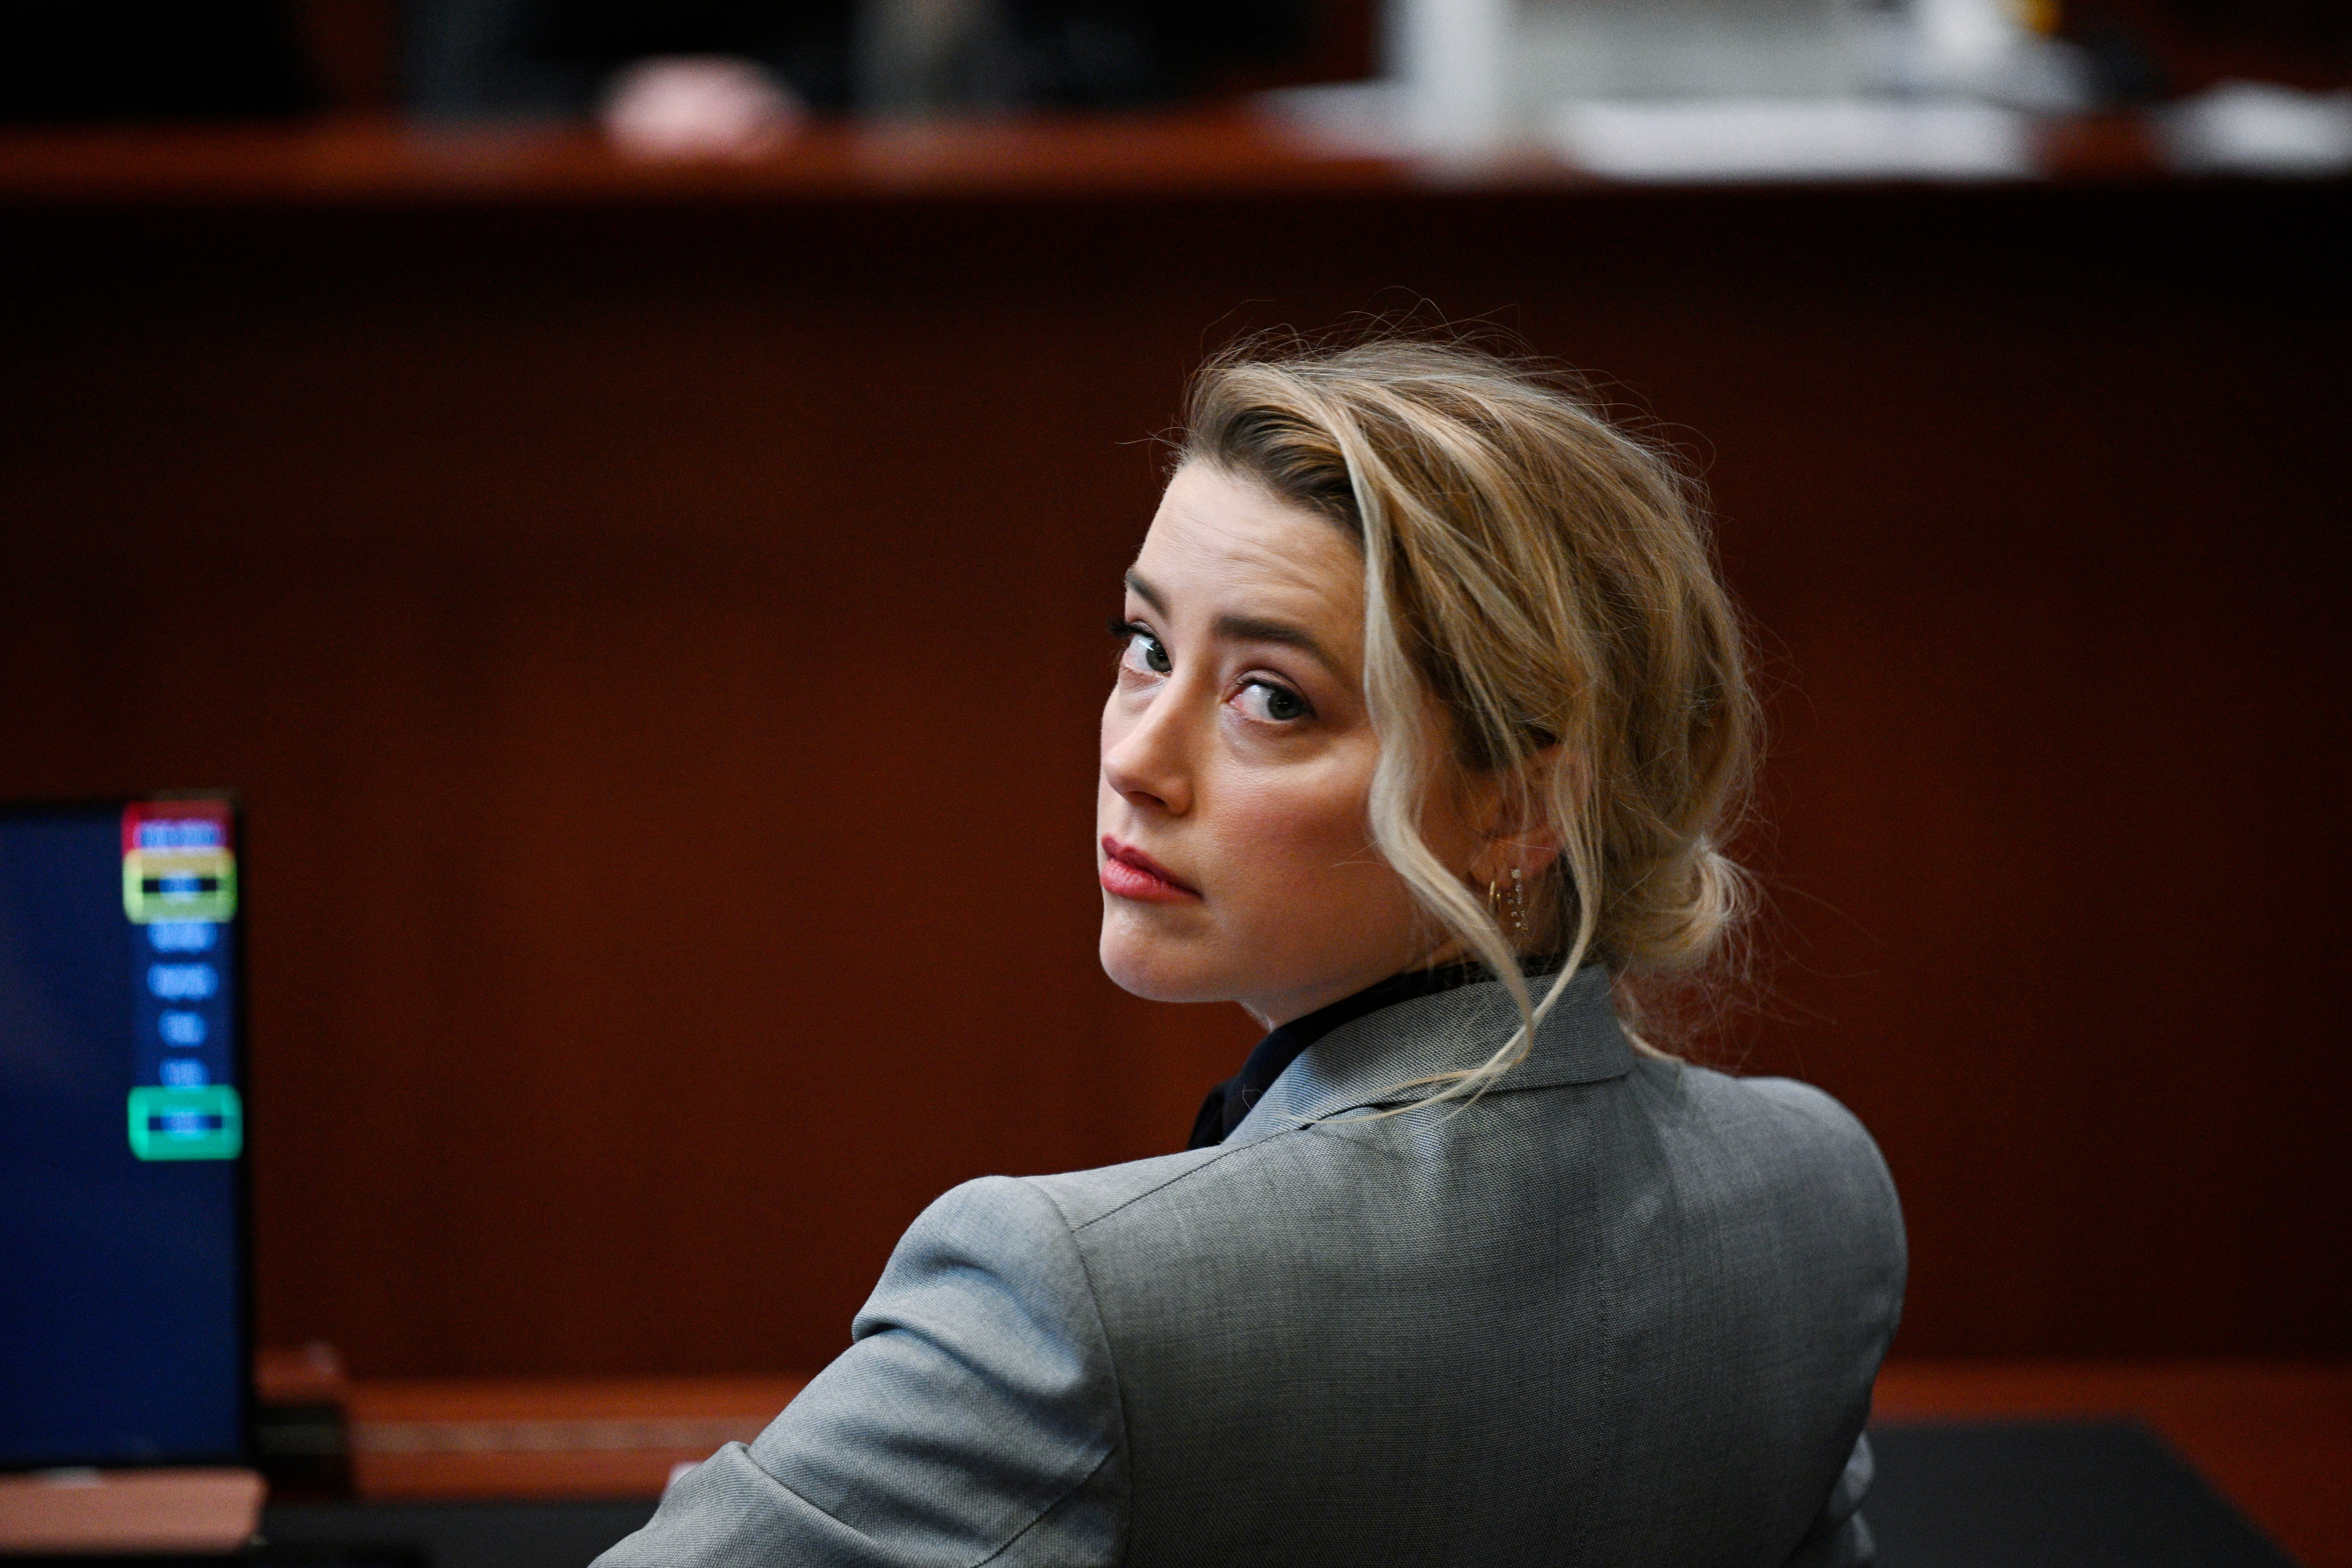 Actress Amber Heard inside the courtroom at the Fairfax County Circuit Court 12 April 2022